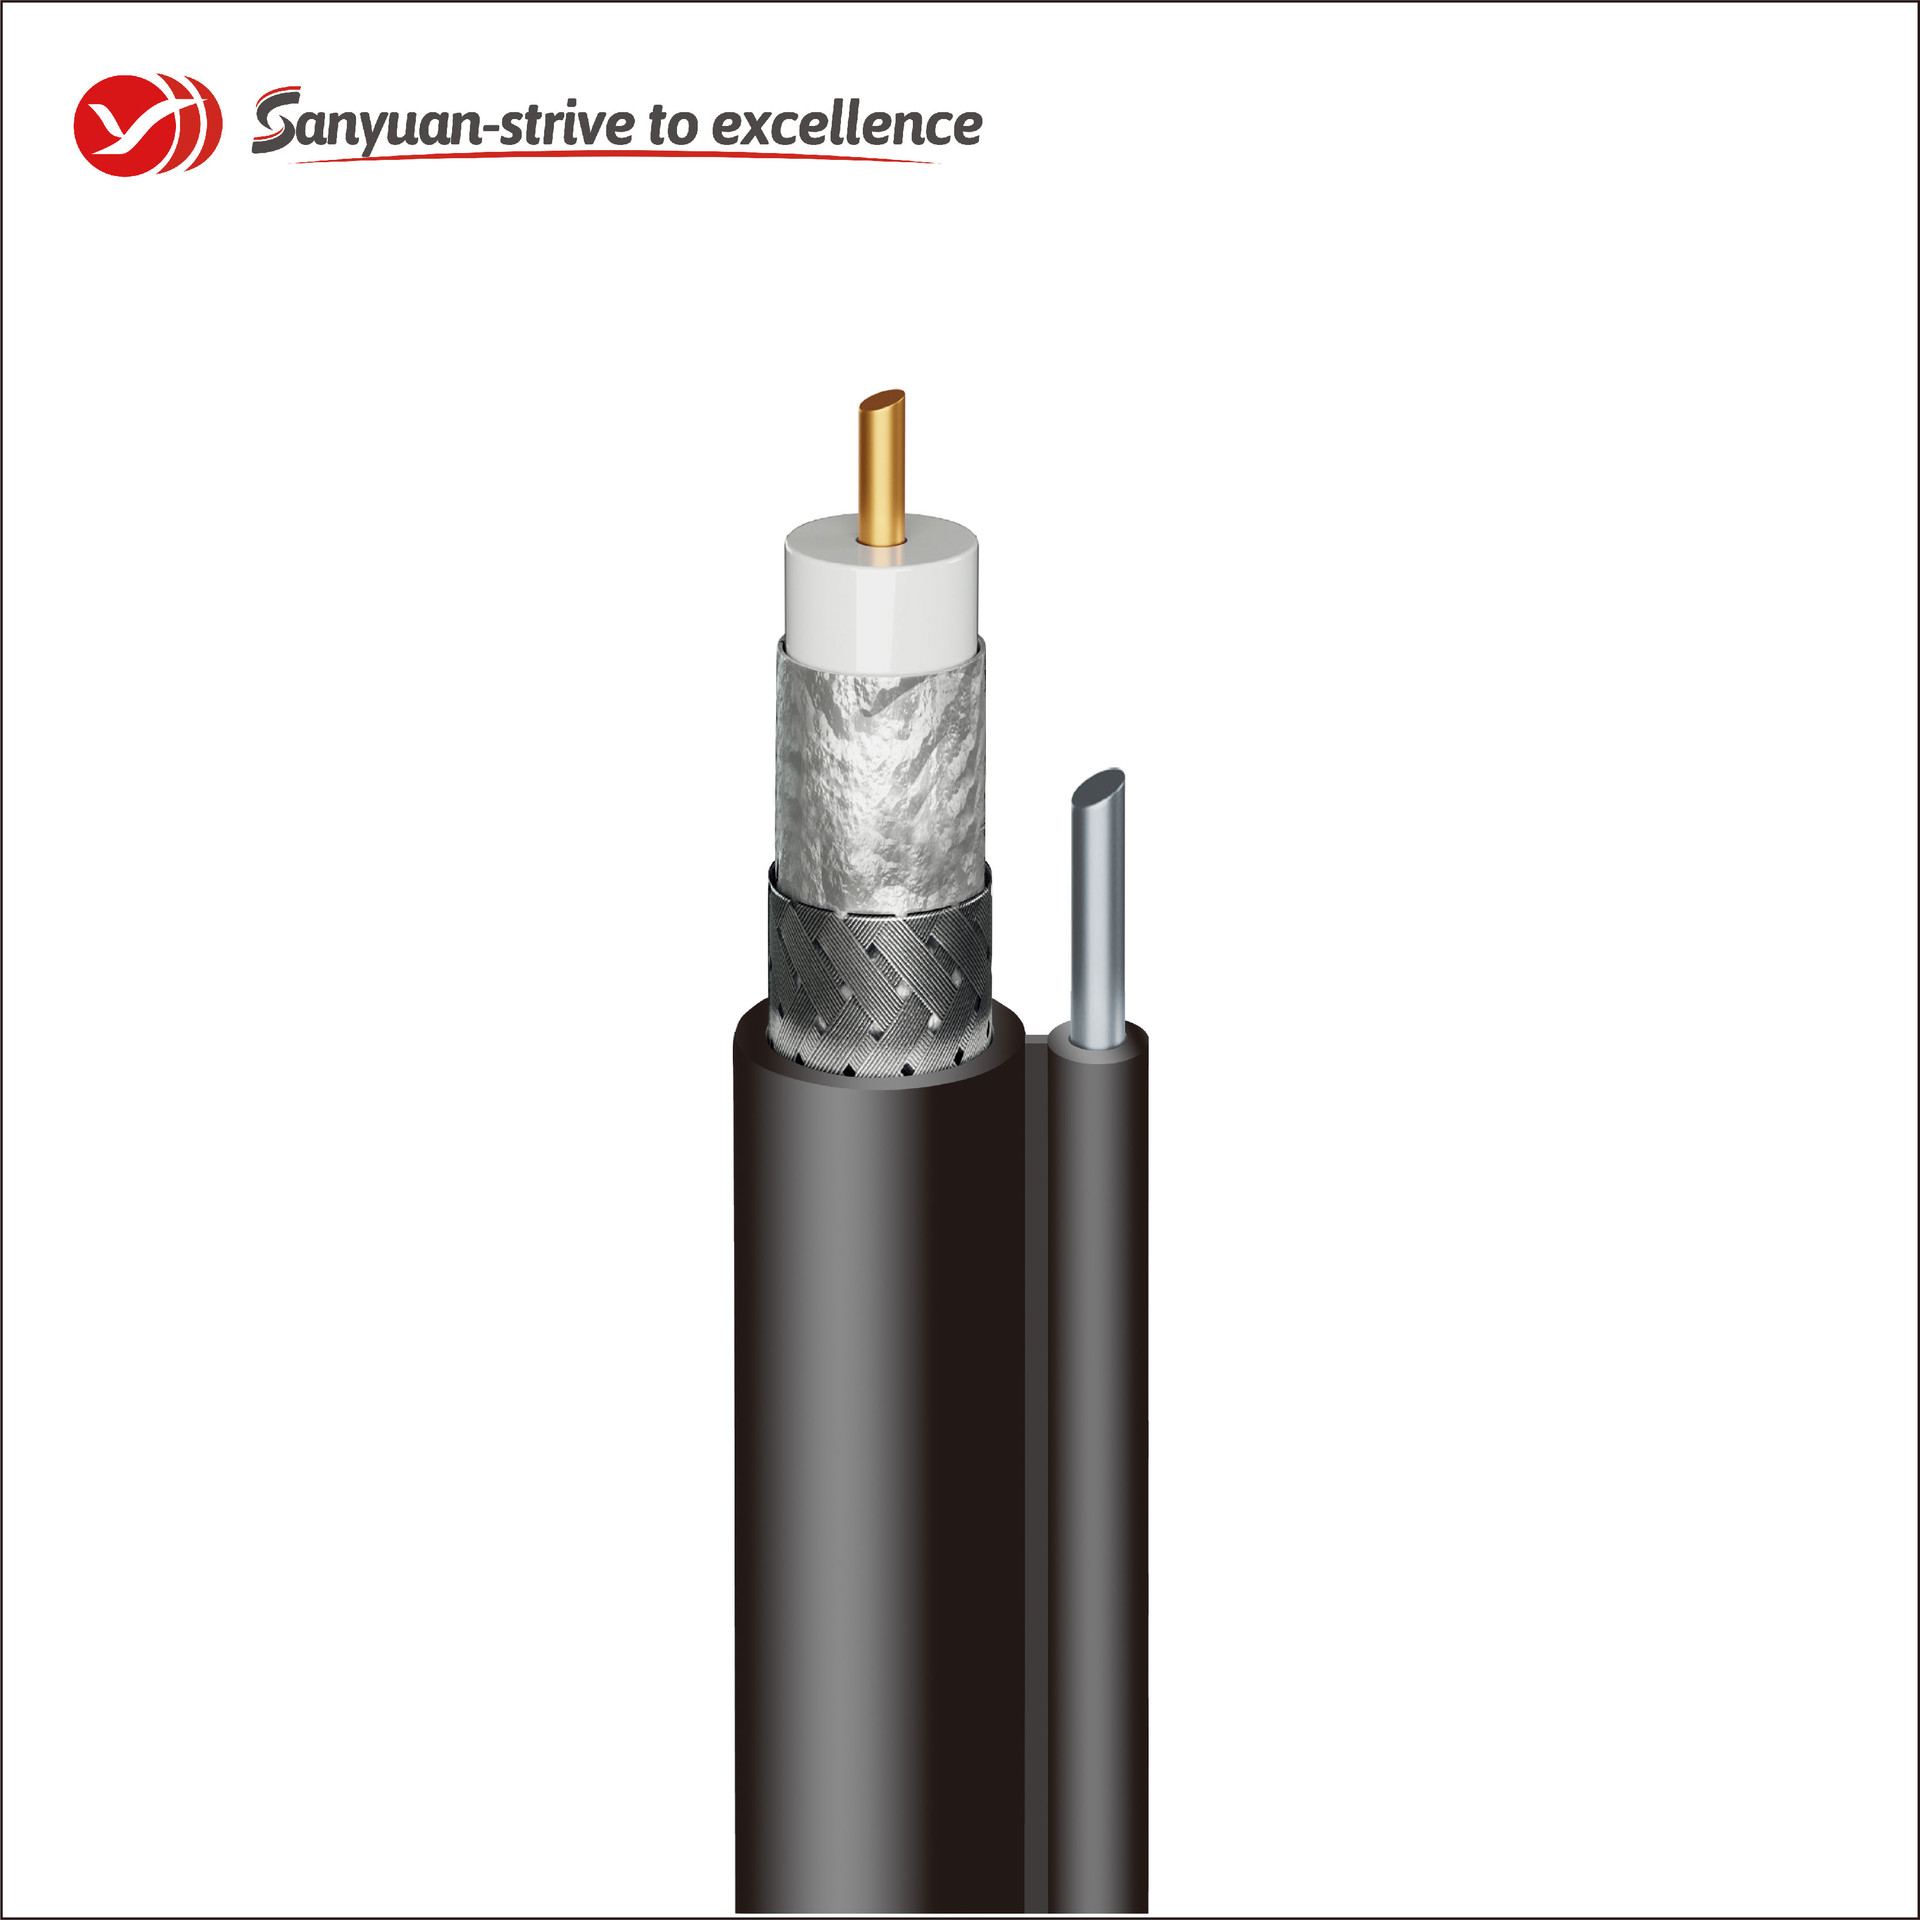 RG11 75 Ohm Coaxial Cable Series 11 Drop Cable SYRG11BVM